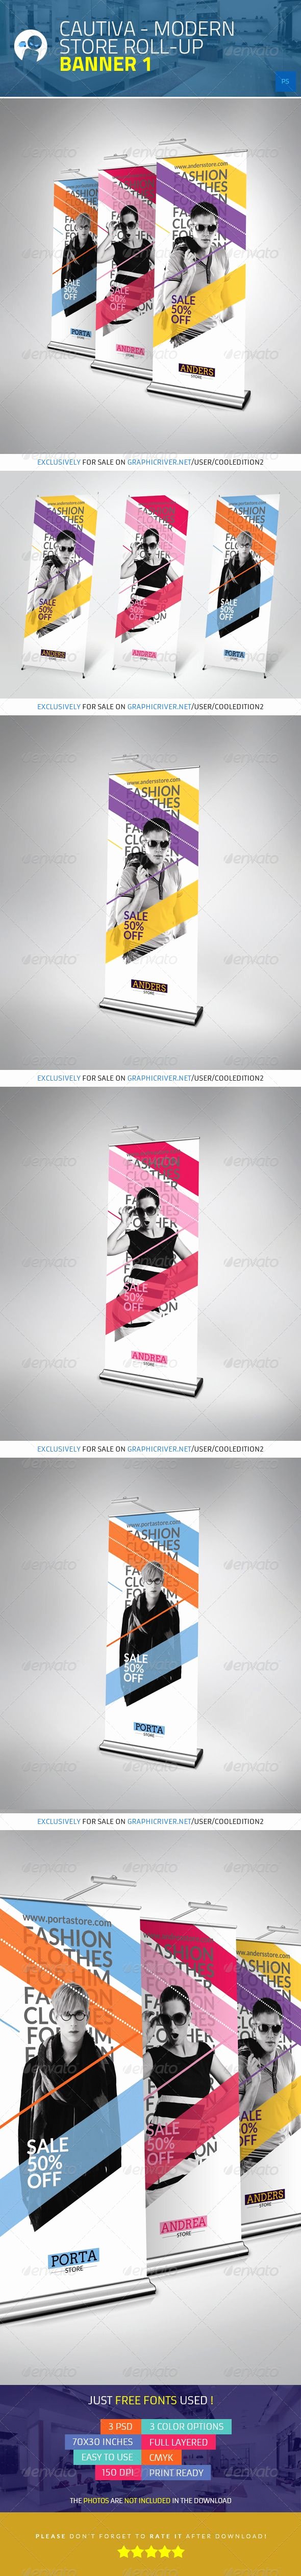 Retractable Banner Design Template New 1000 Images About Roll Up Banners On Pinterest